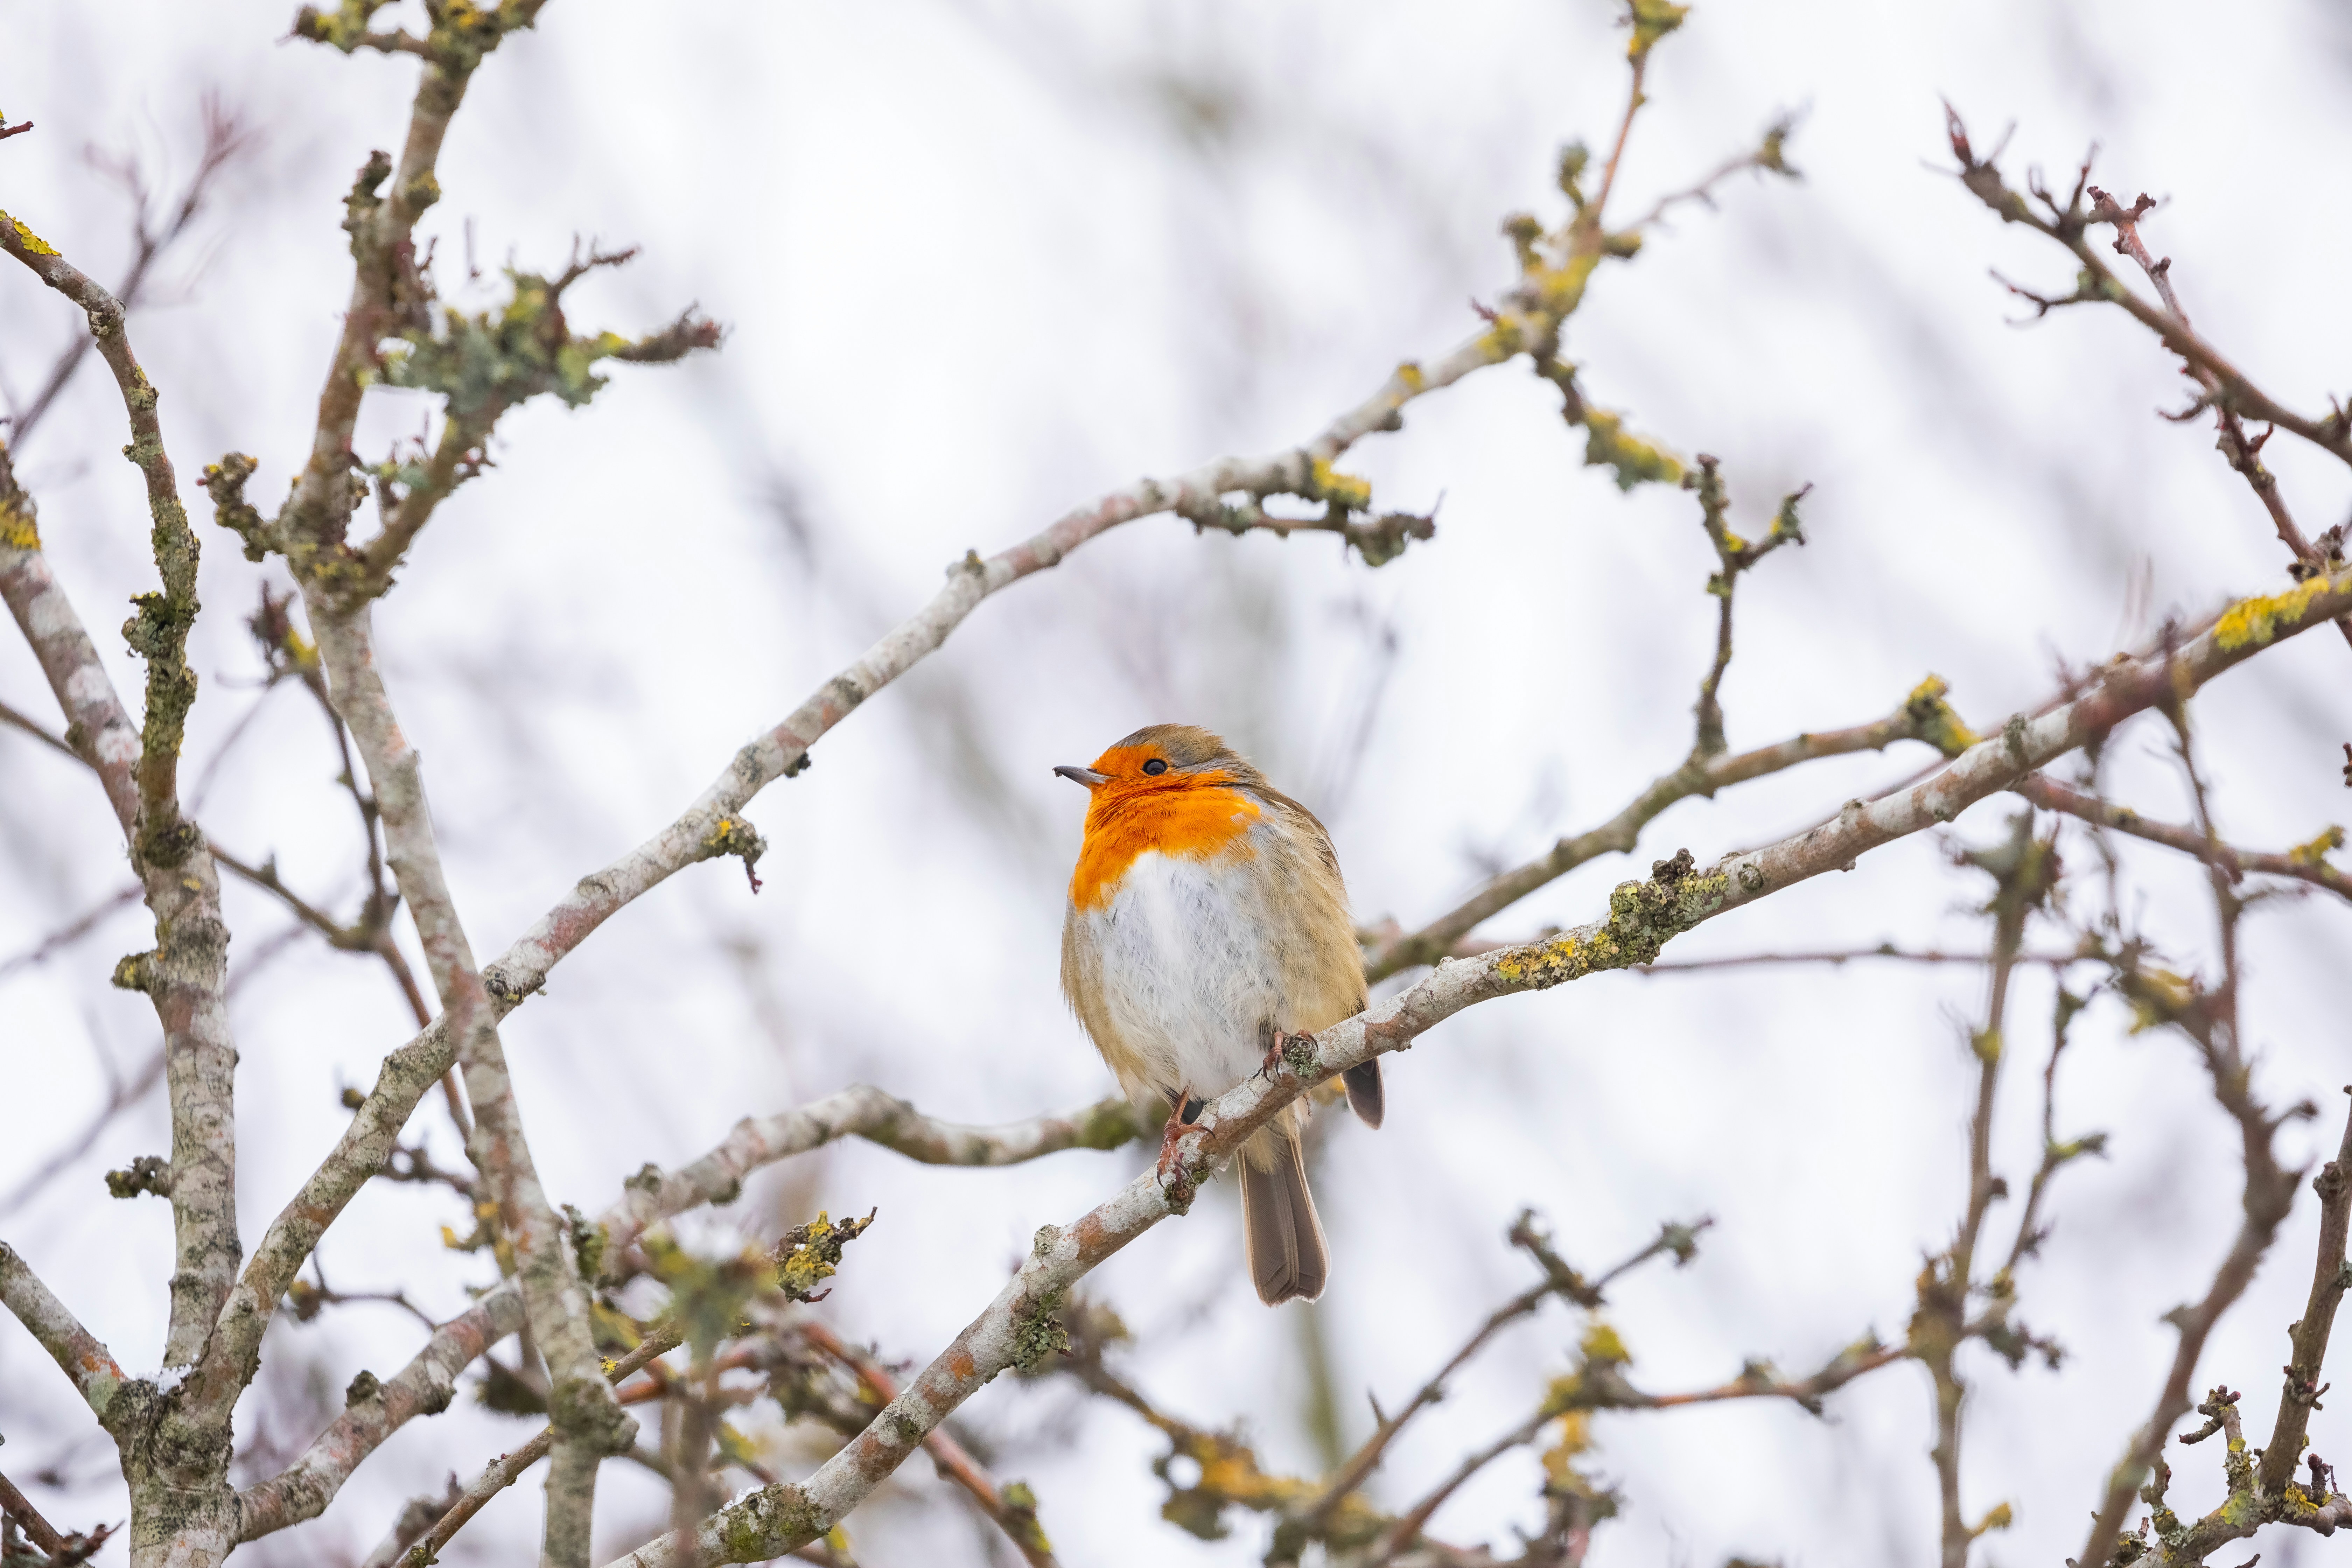 In most of the UK we've had snow for the last few days. I live in Kent, and we get snow so rarely that the local councils don't really handle it well. It does mean though that there's less cars on the roads and plenty of opportunity to get some nice photos of the Robins in the snow :)